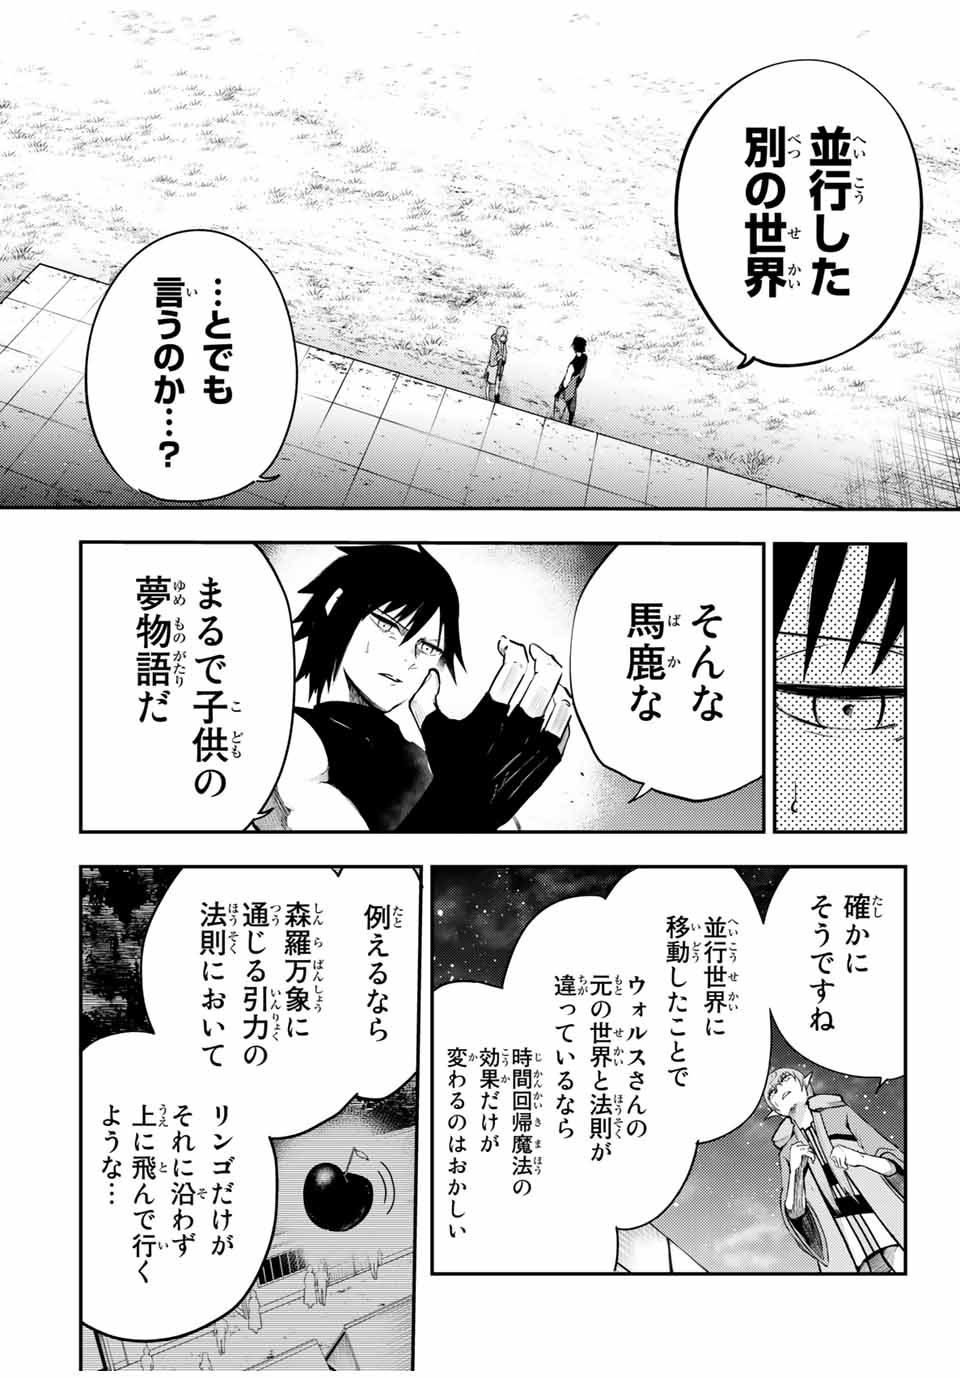 the strongest former prince-; 奴隷転生 ～その奴隷、最強の元王子につき～ 第50話 - Page 4